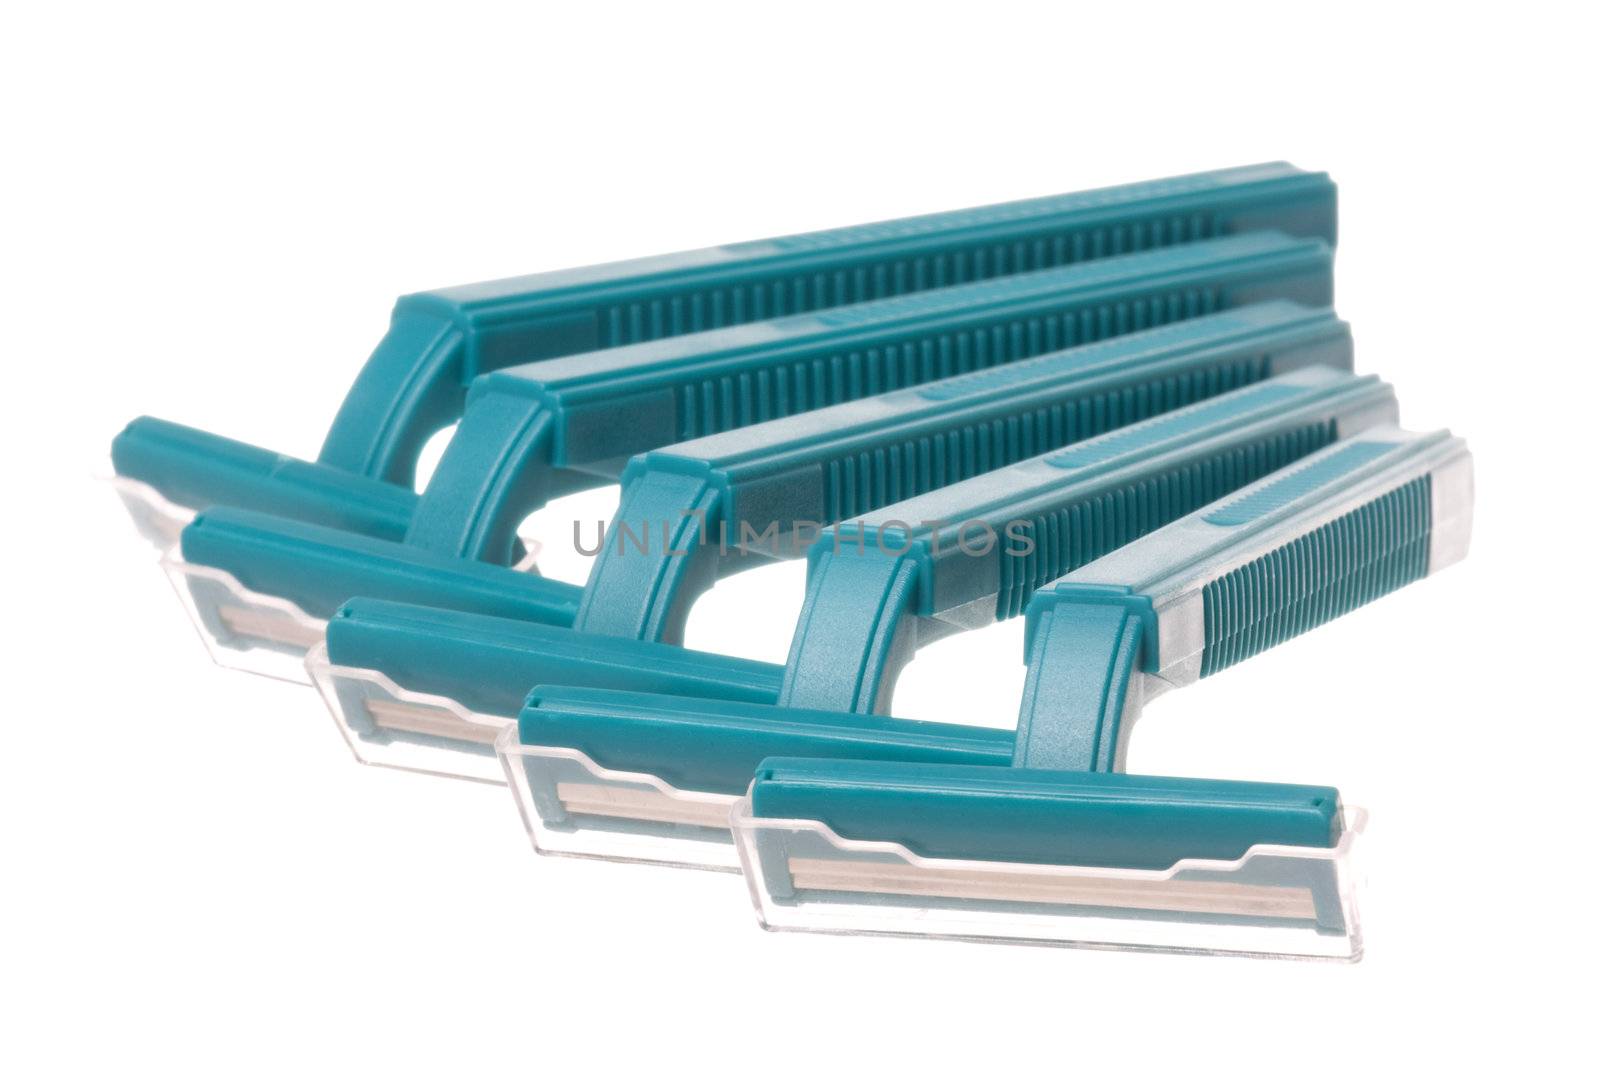 Isolated image of disposable razors.